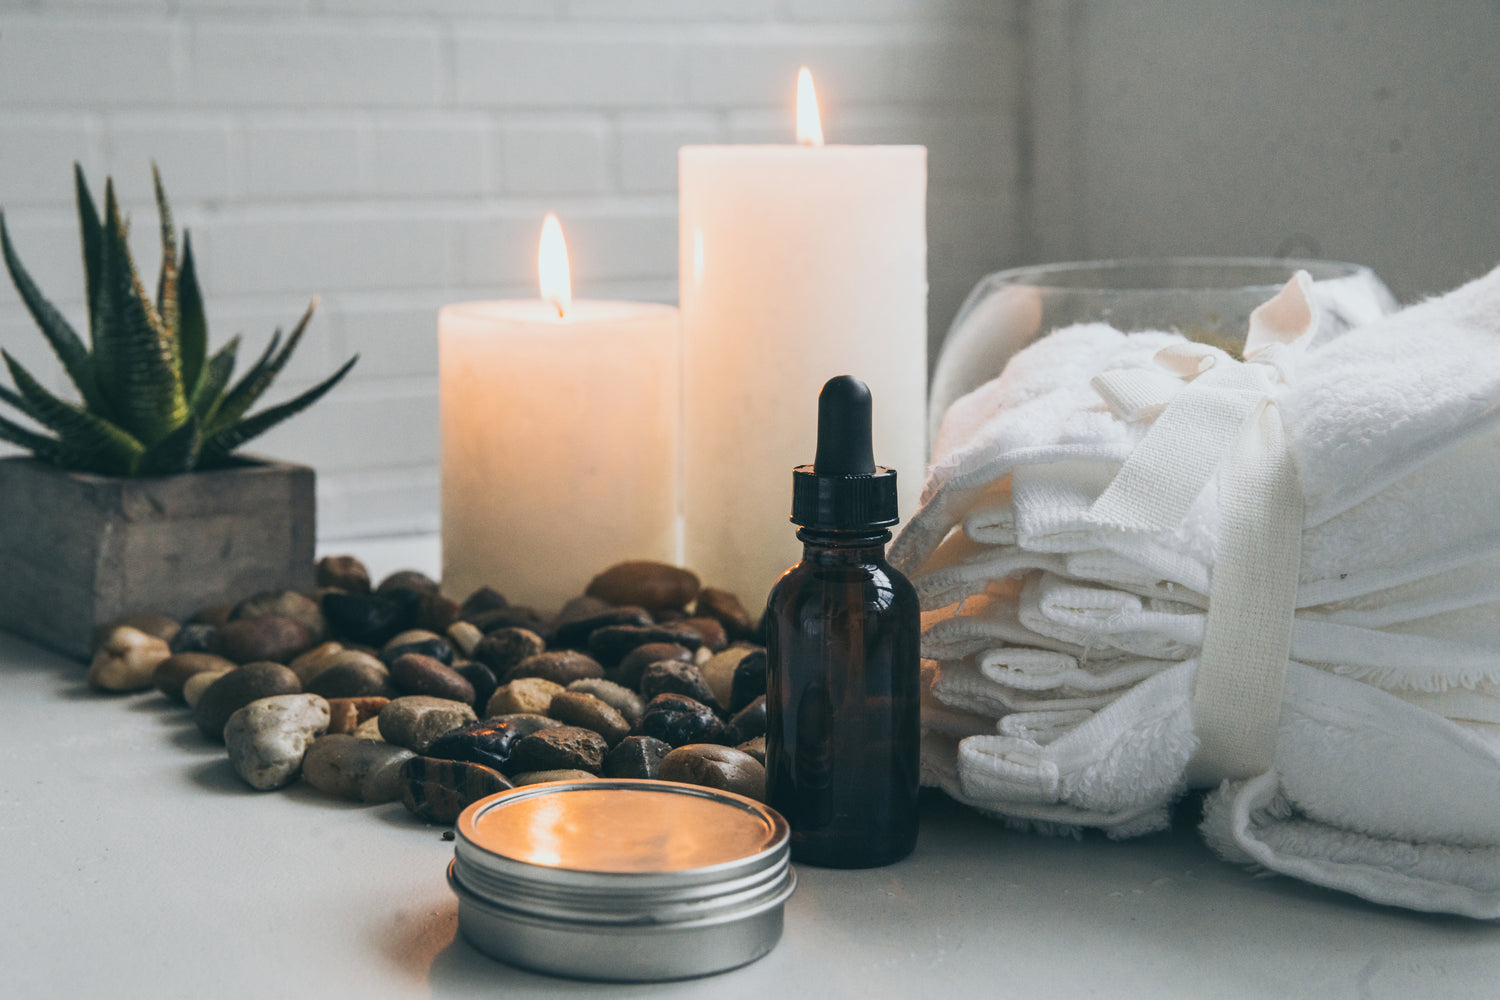 A pleasant dispay of candles, linens, and massage oils